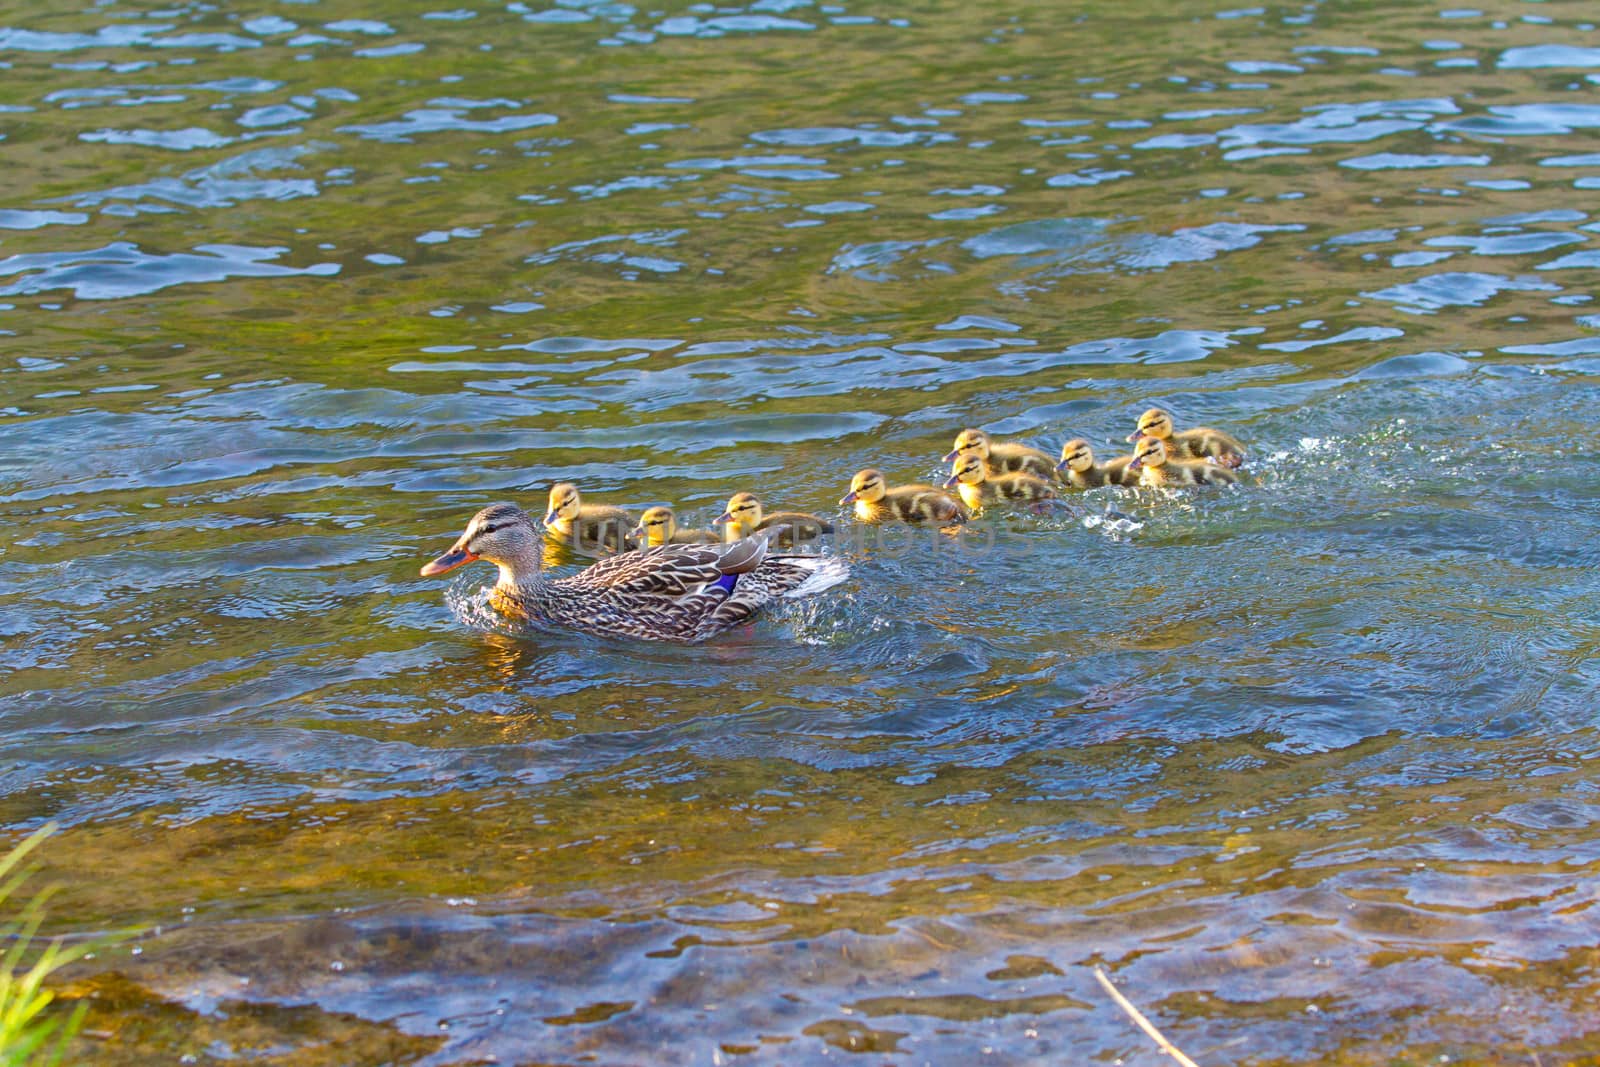 A mother duck swims with her chicks in the Deschutes River while playing follow the leader.